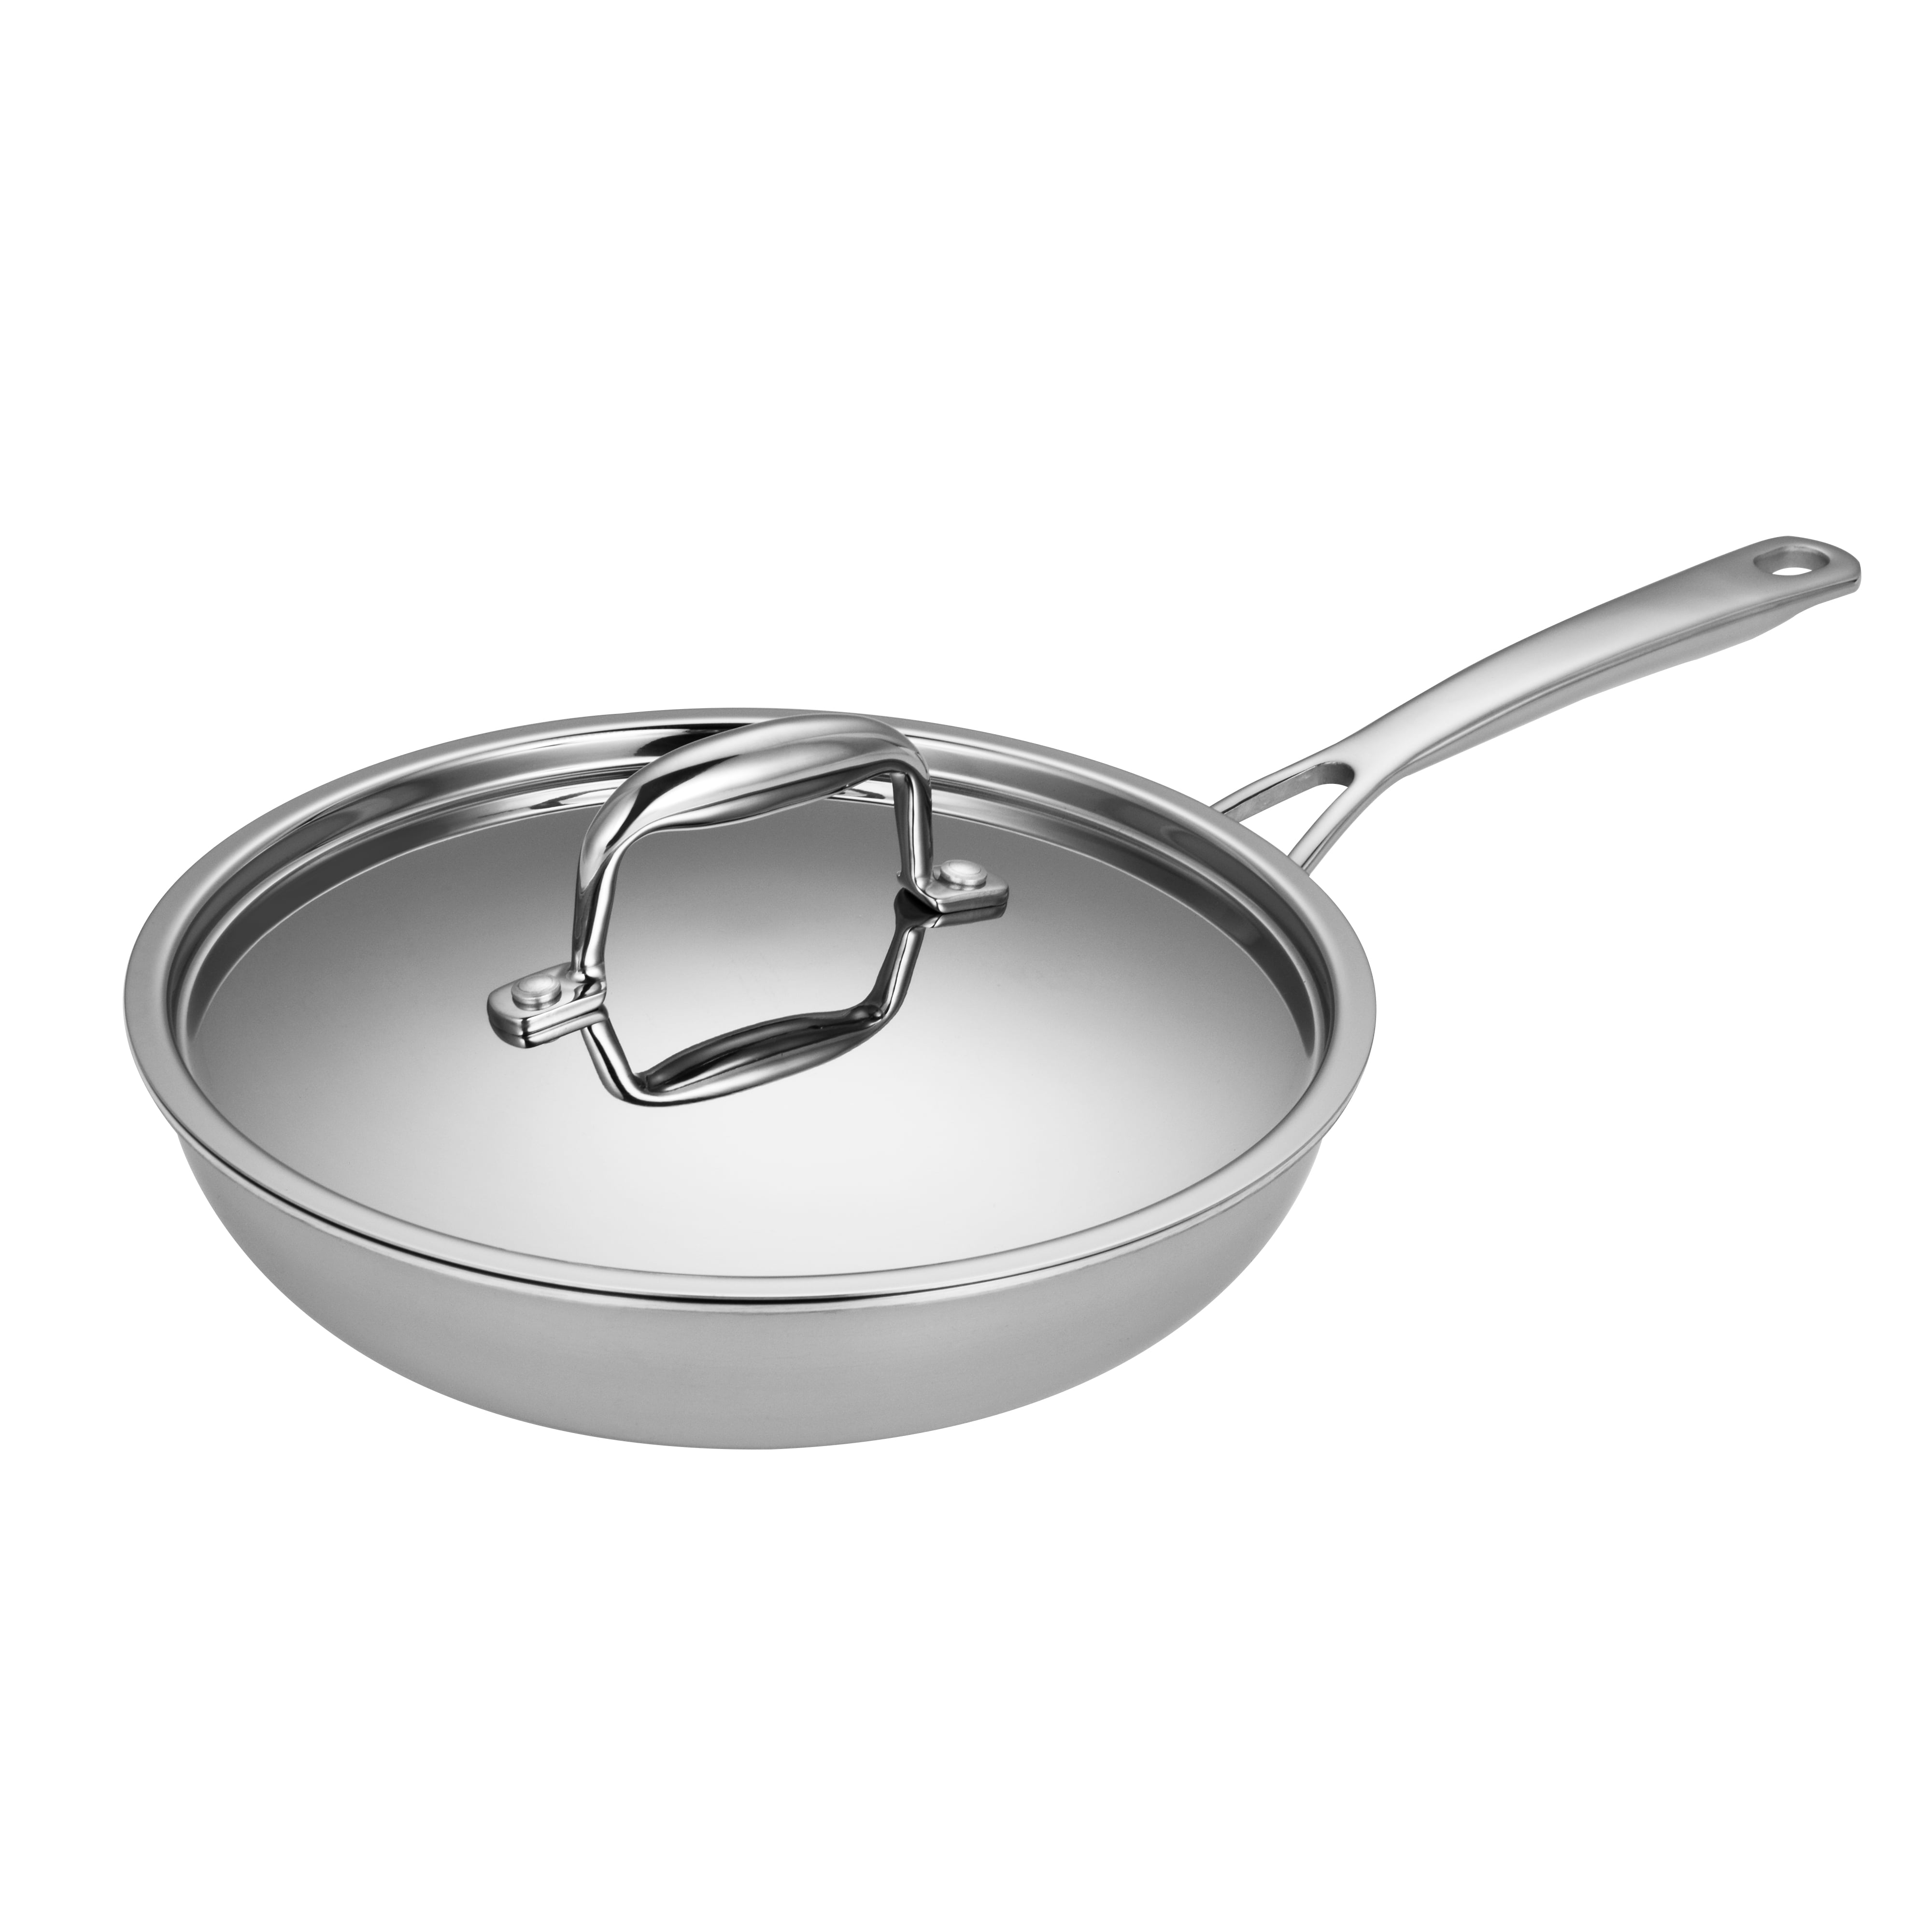 Innovaze 10 Inch Triple-Ply Stainless Steel Fry Pan with Lid